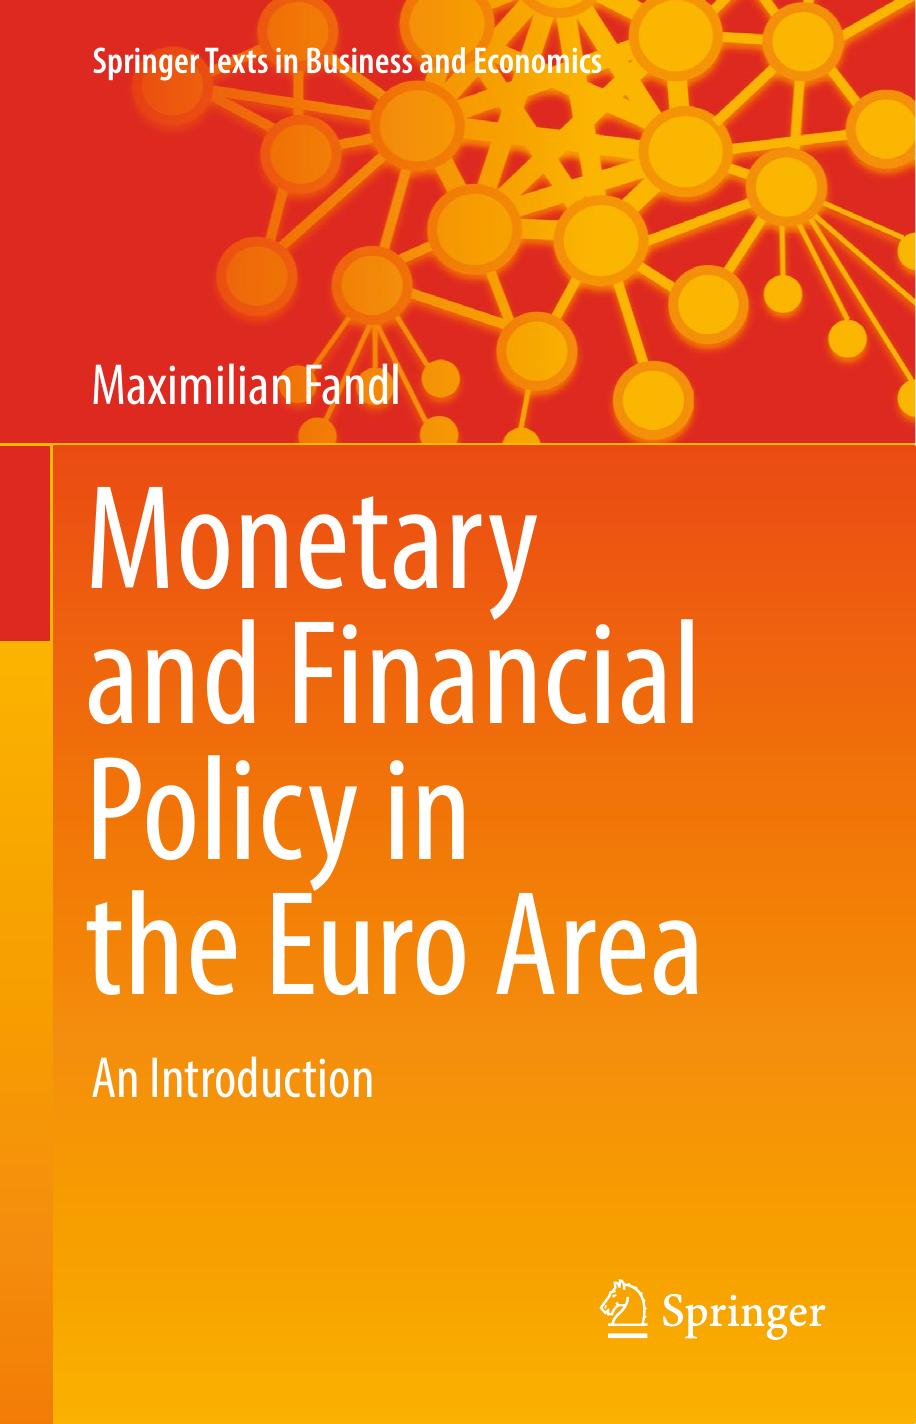 Monetary and Financial Policy in the Euro Area by Maximilian Fandl